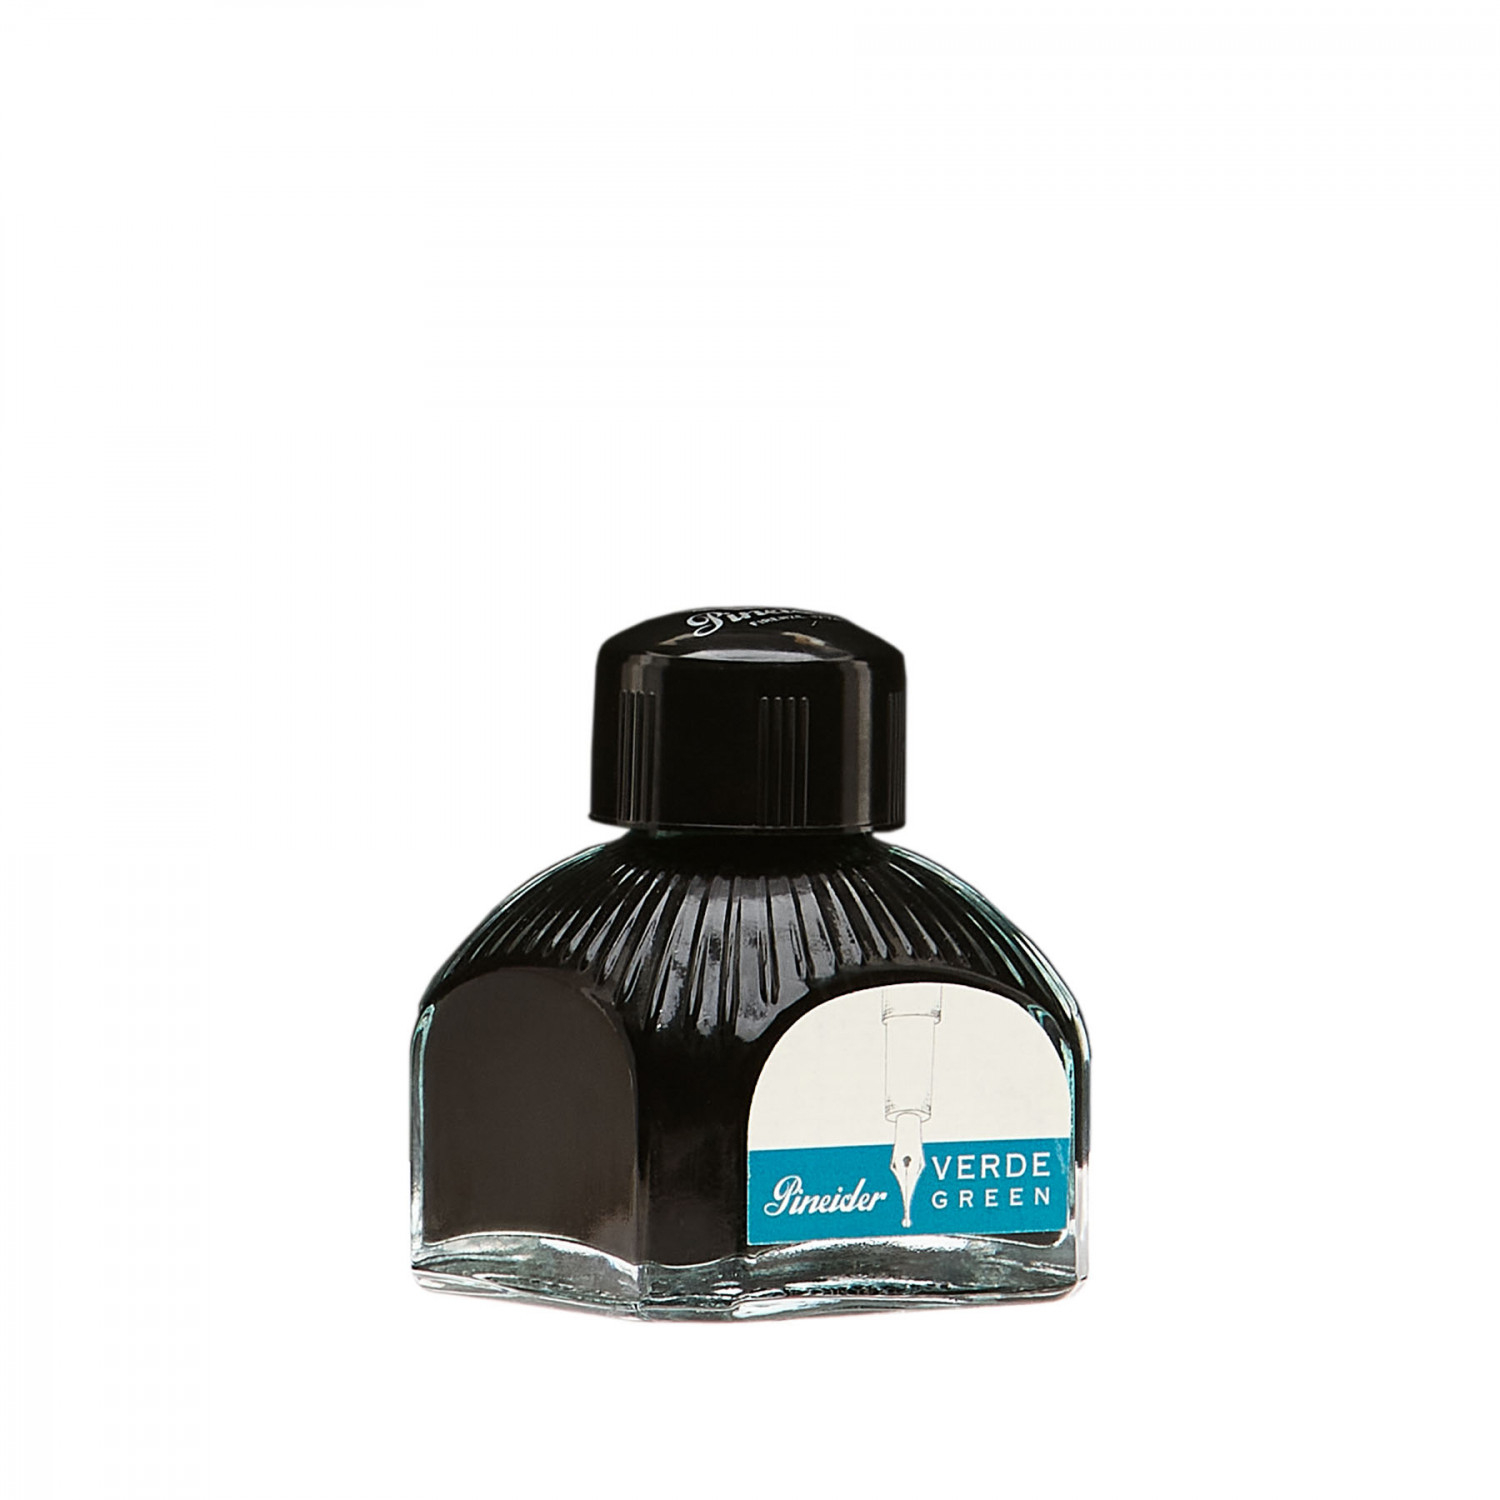 INK WELL 75 ML -BLUE